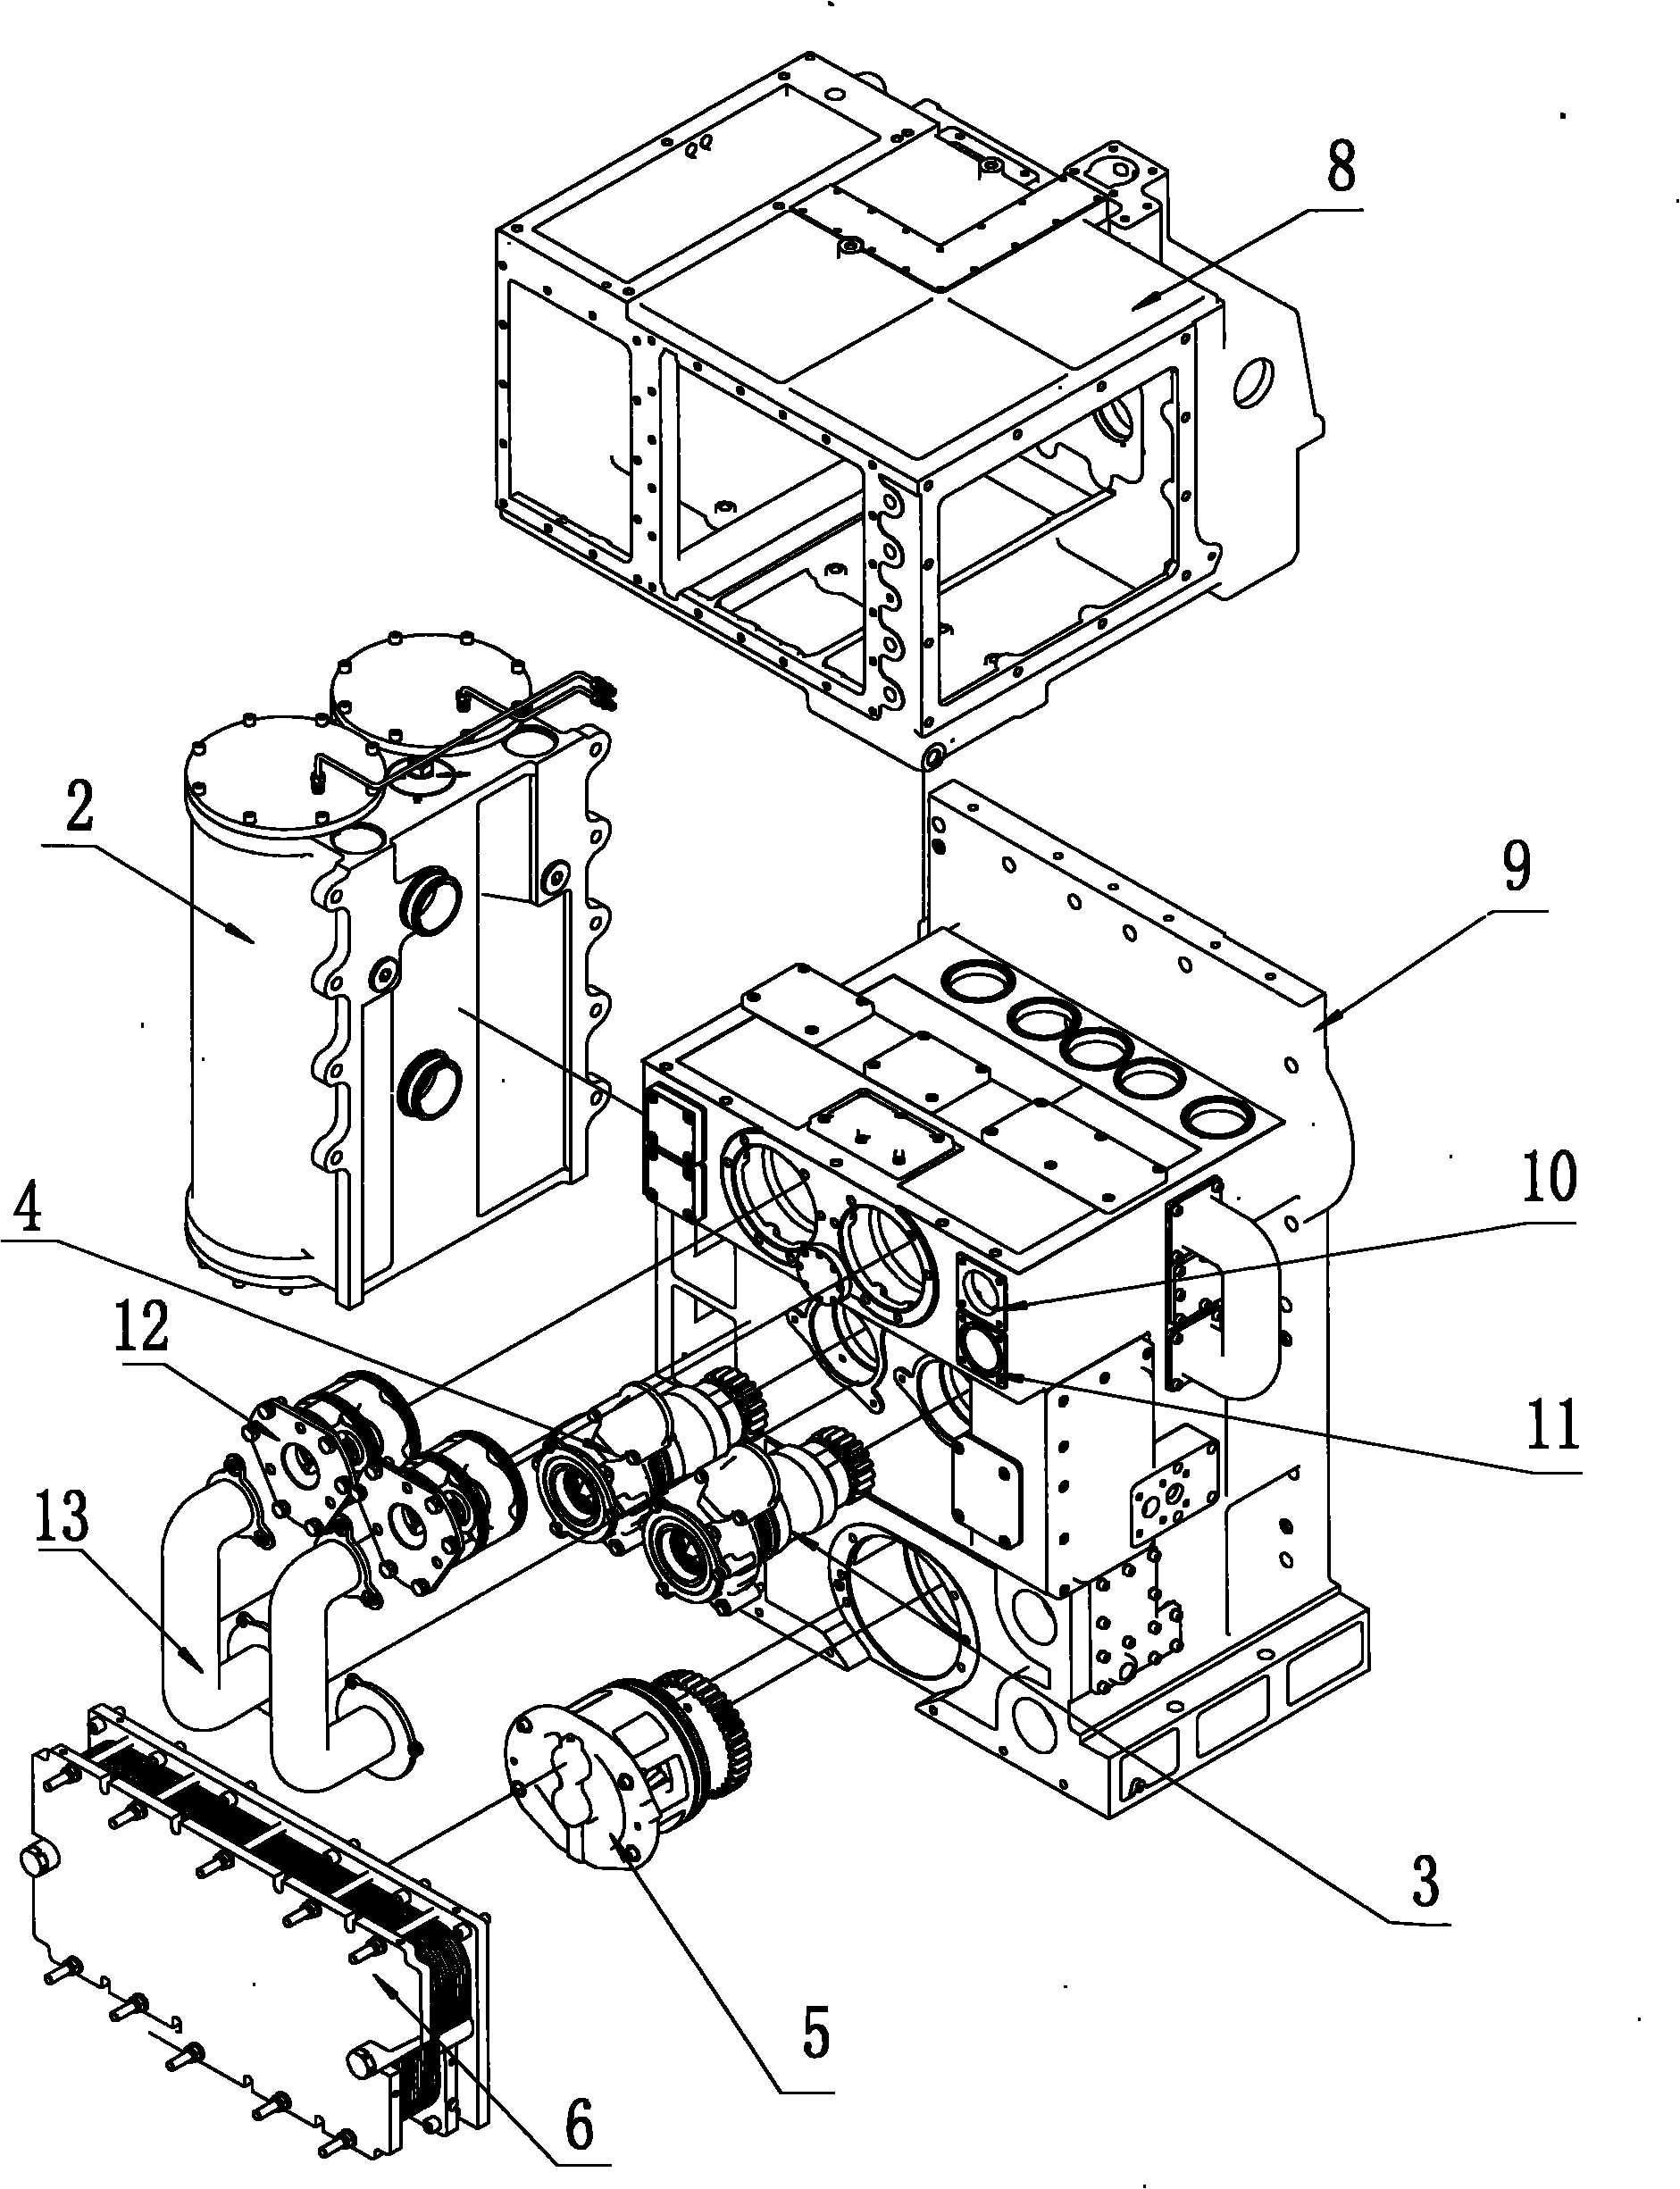 Auxiliary system for diesel engine